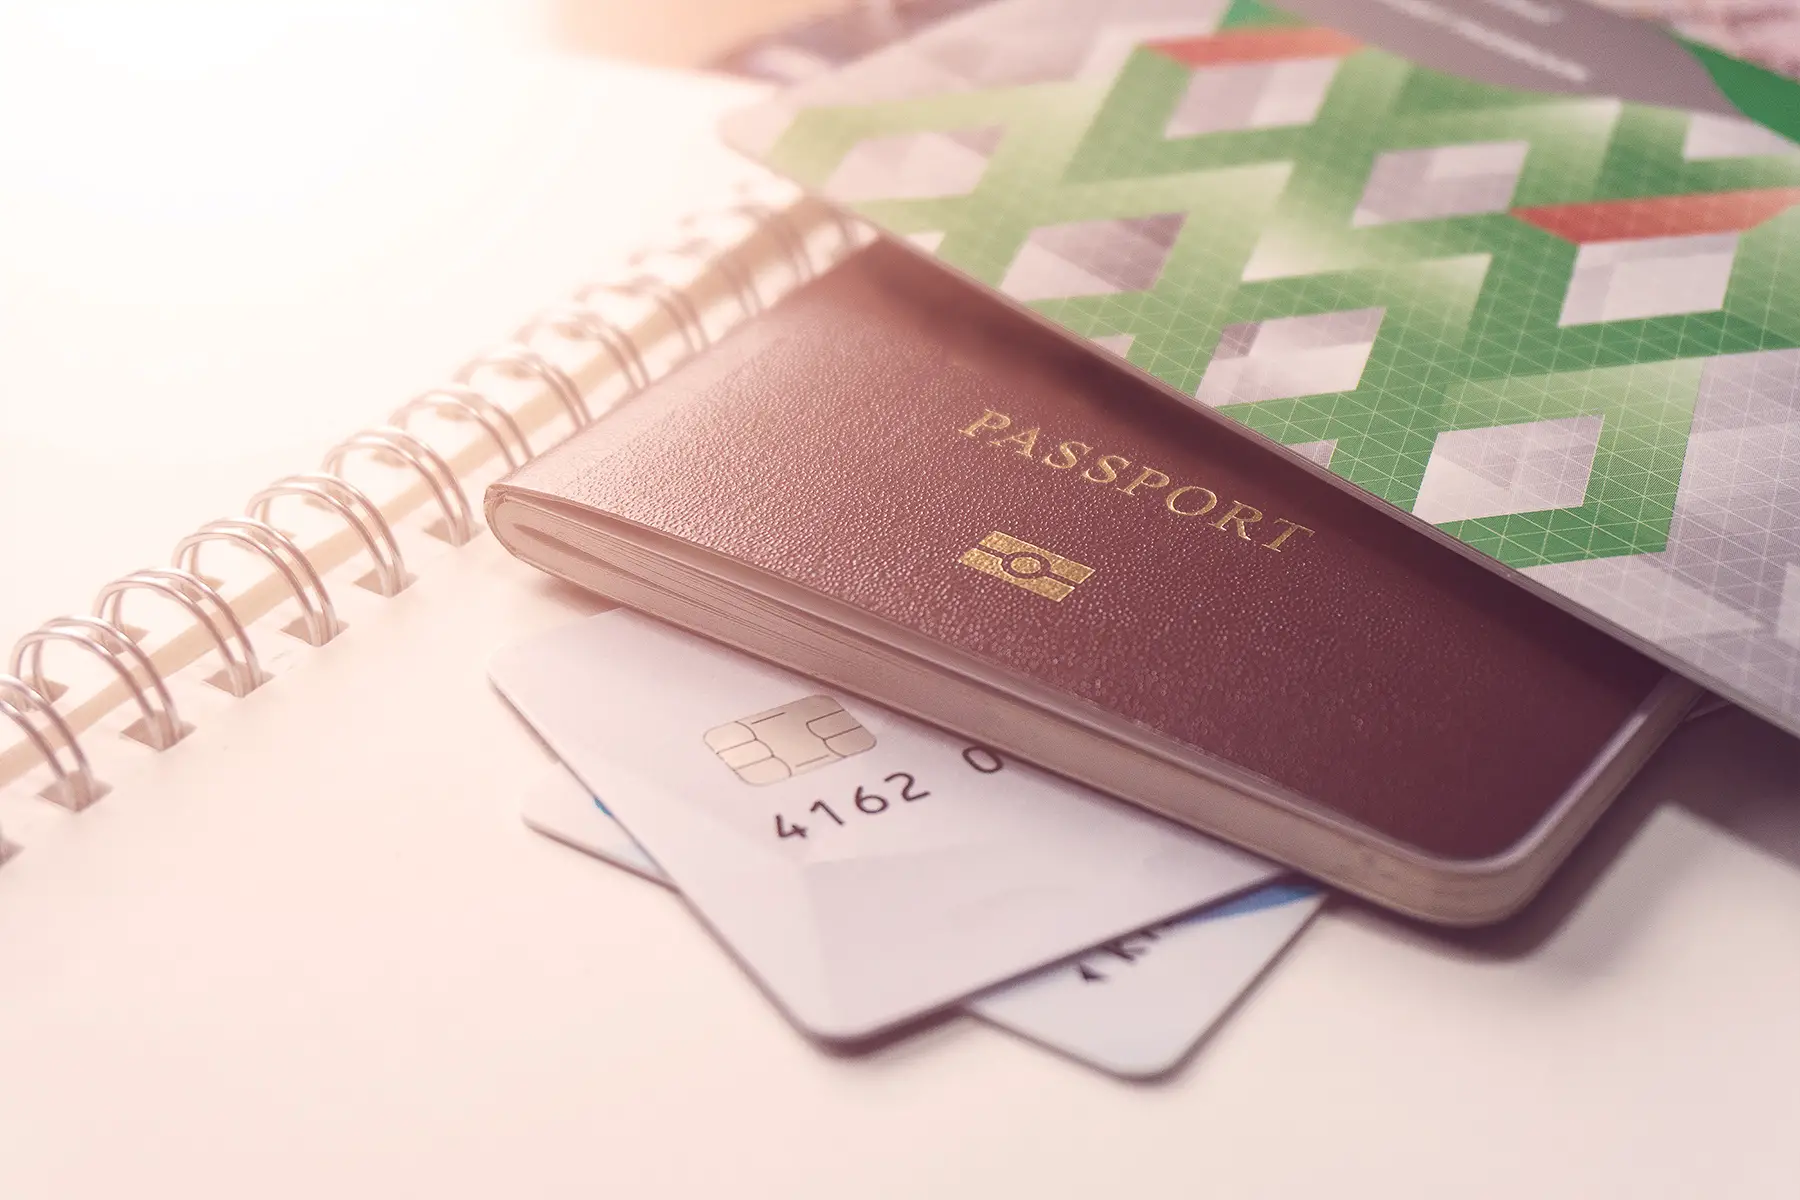 moving out checklist: passport and ids